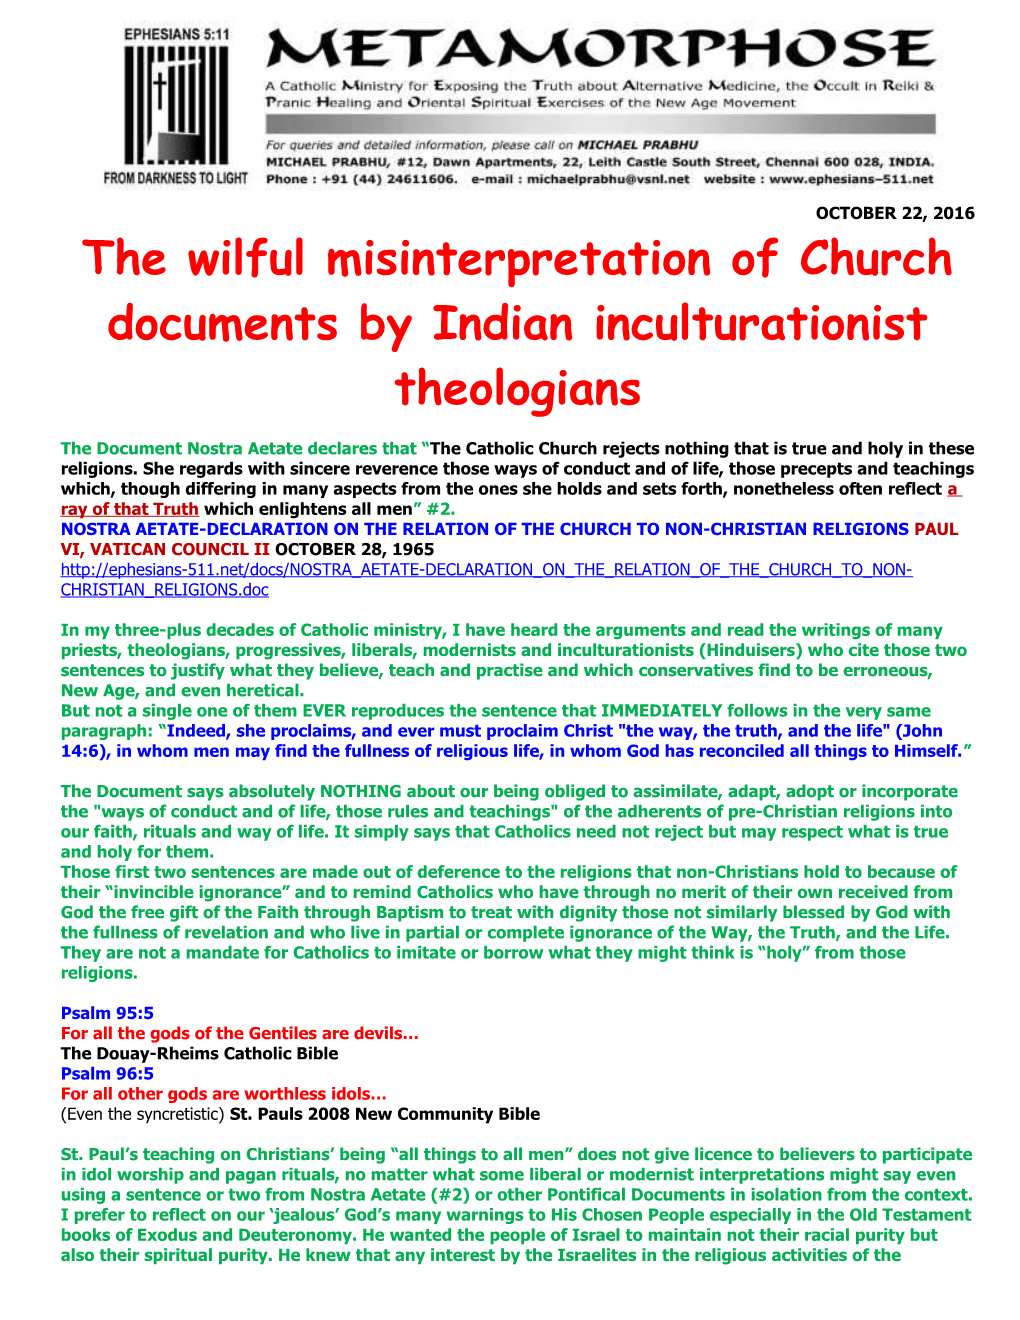 The Wilful Misinterpretation of Church Documents by Indian Inculturationist Theologians